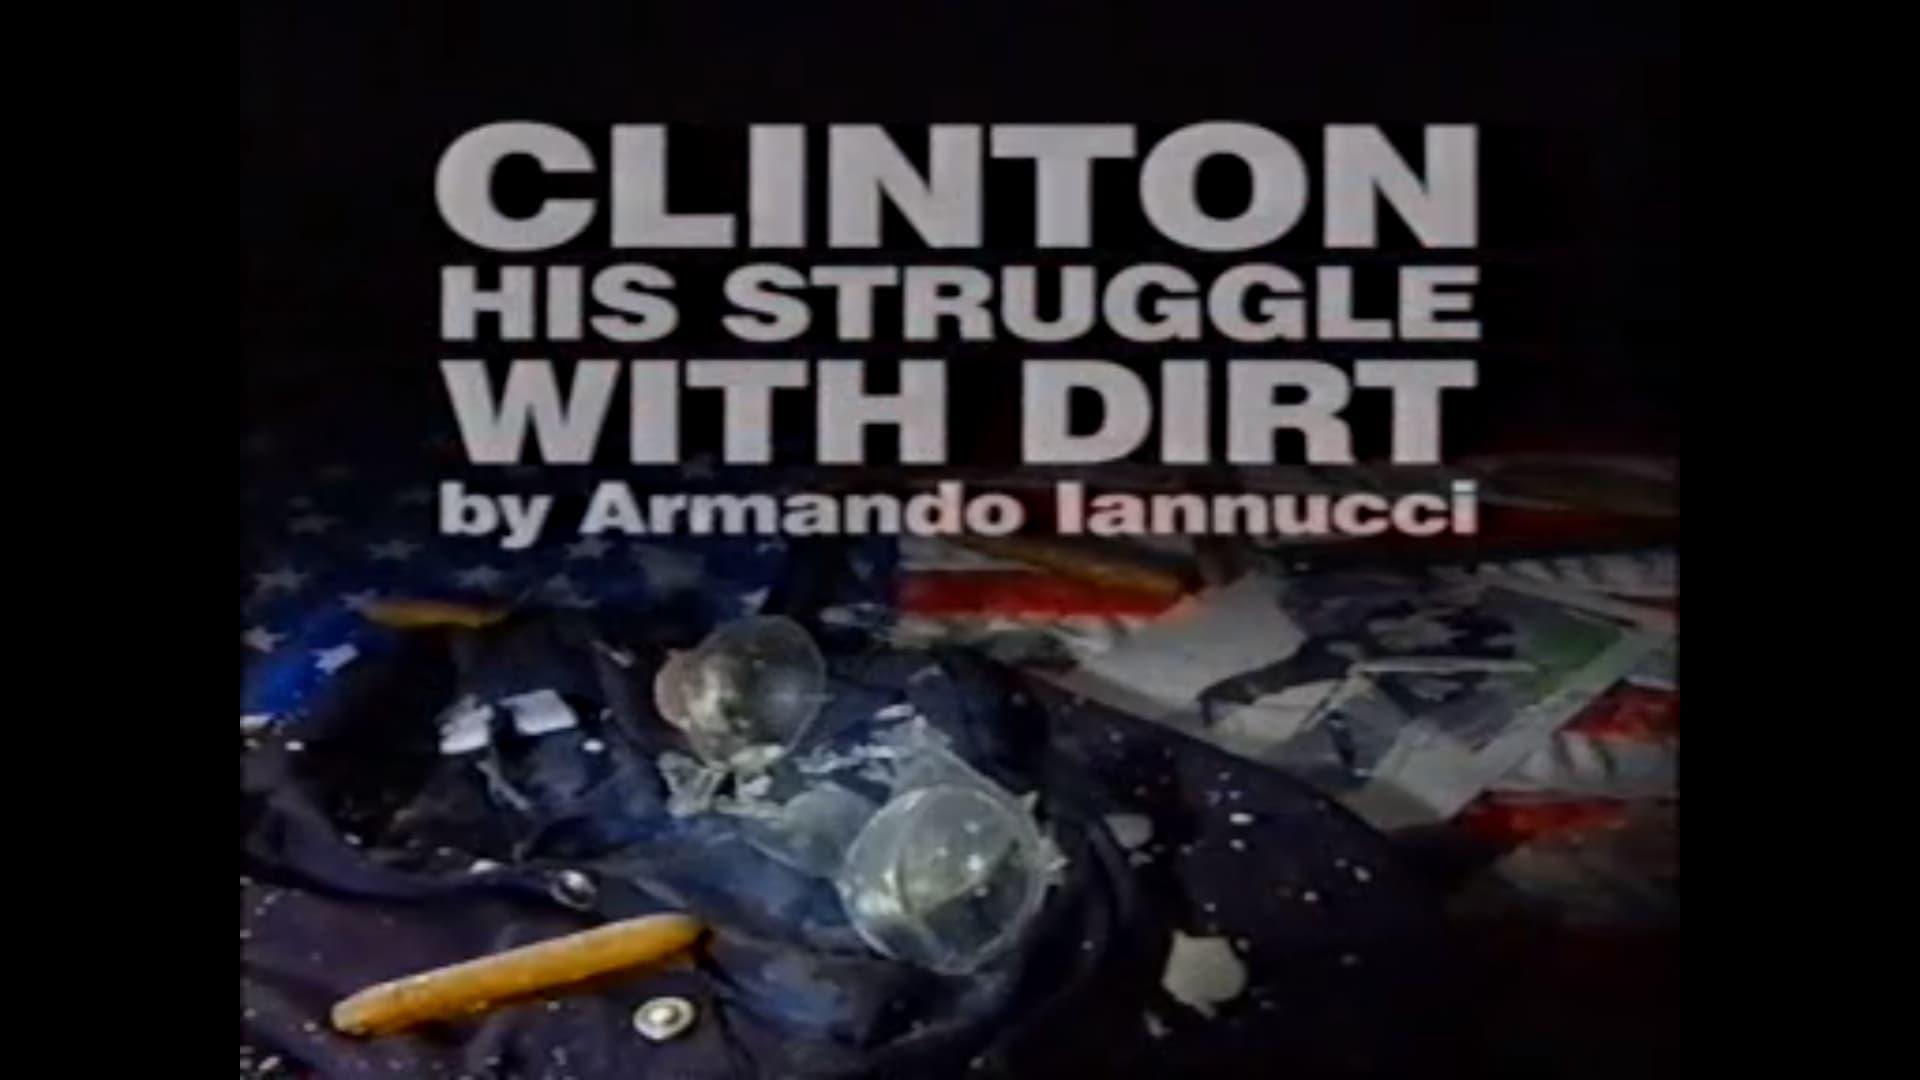 Clinton: His Struggle with Dirt backdrop